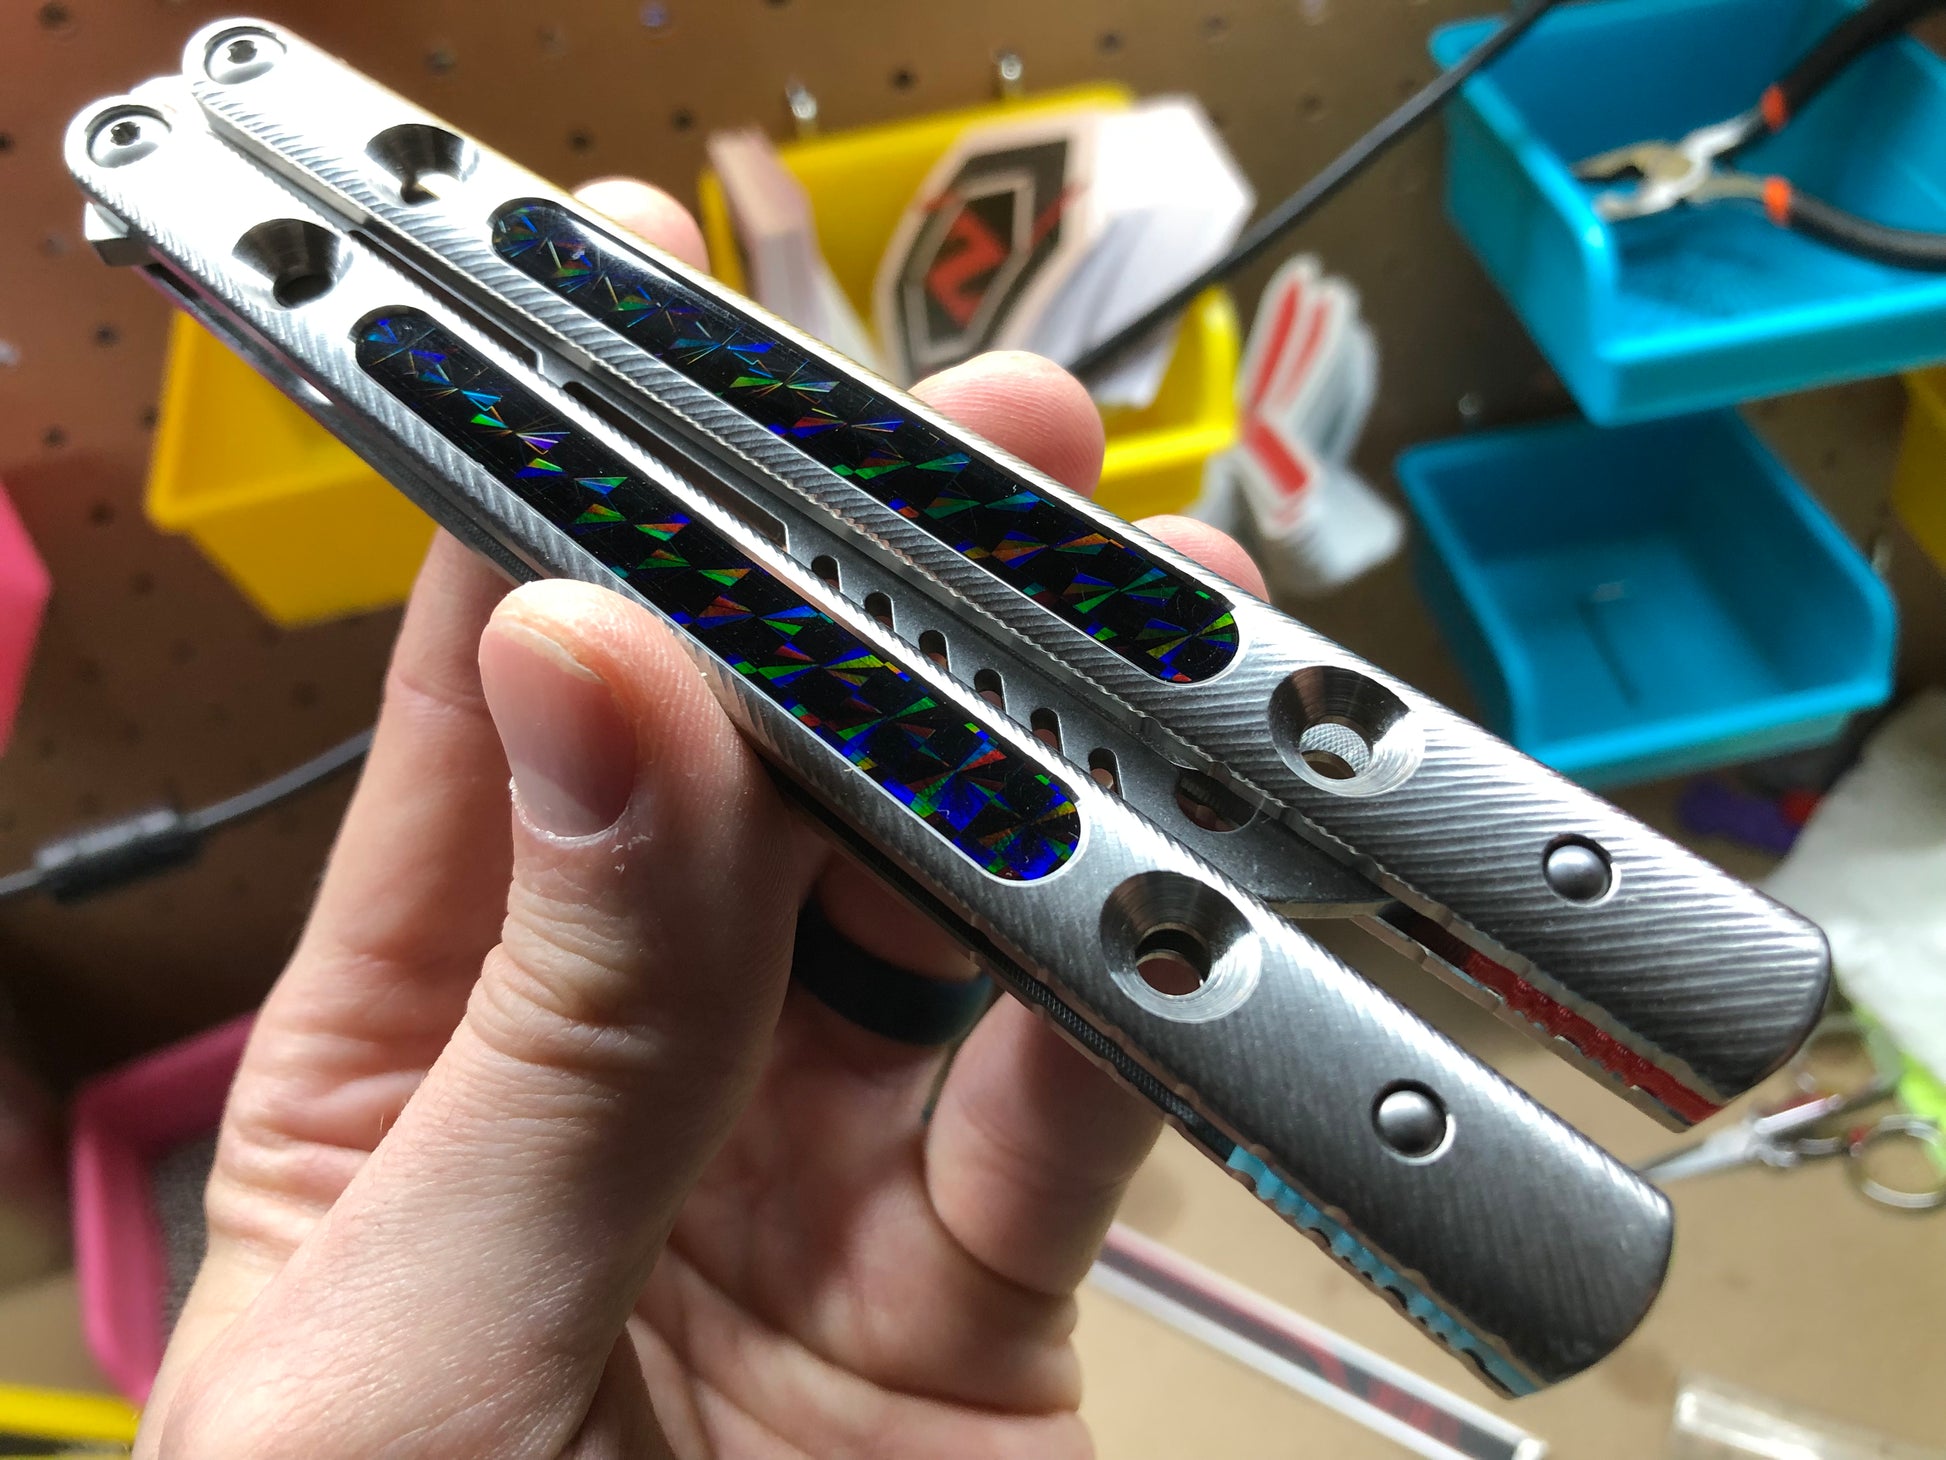 Zippy spacers reduce the handle bias and add positive jimping to your Squiggle Krake, while the inlays add grip and comfort. Individually, both spacers and the inlays eliminate ring and are designed to fit the titanium Squiggle handles for the Squid Industries Krake Raken balisong.